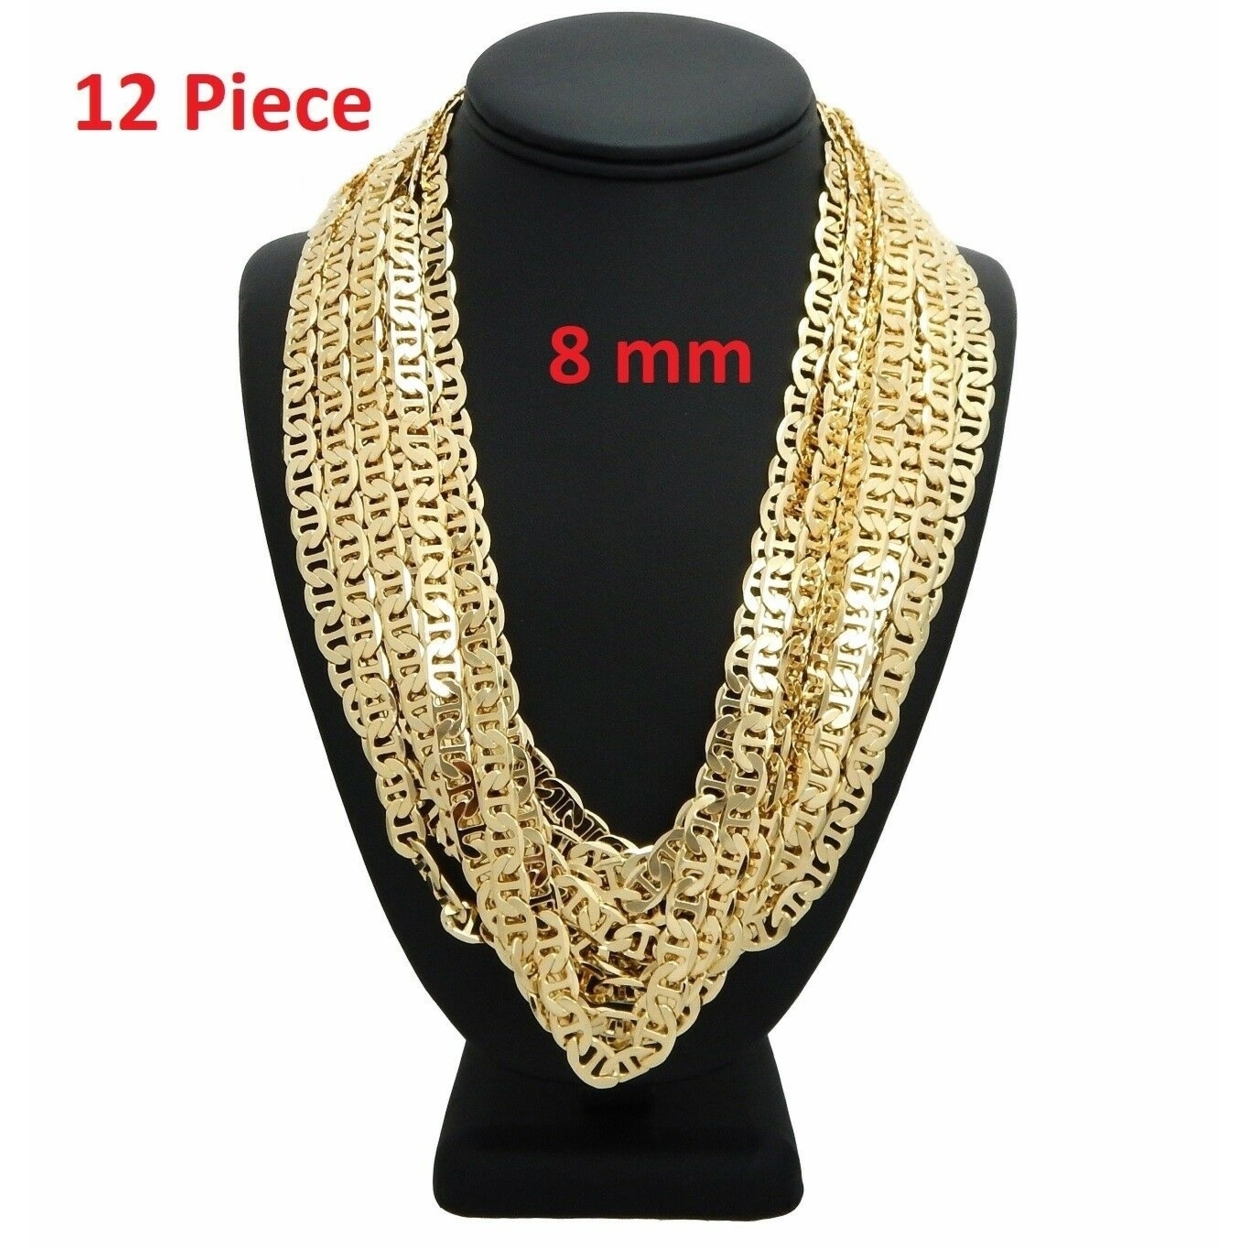 12 PCS. Mariner Anchor Chain Necklace 8mm 20 24 30 Gold Filled Finish Wholesale Lots - 24''